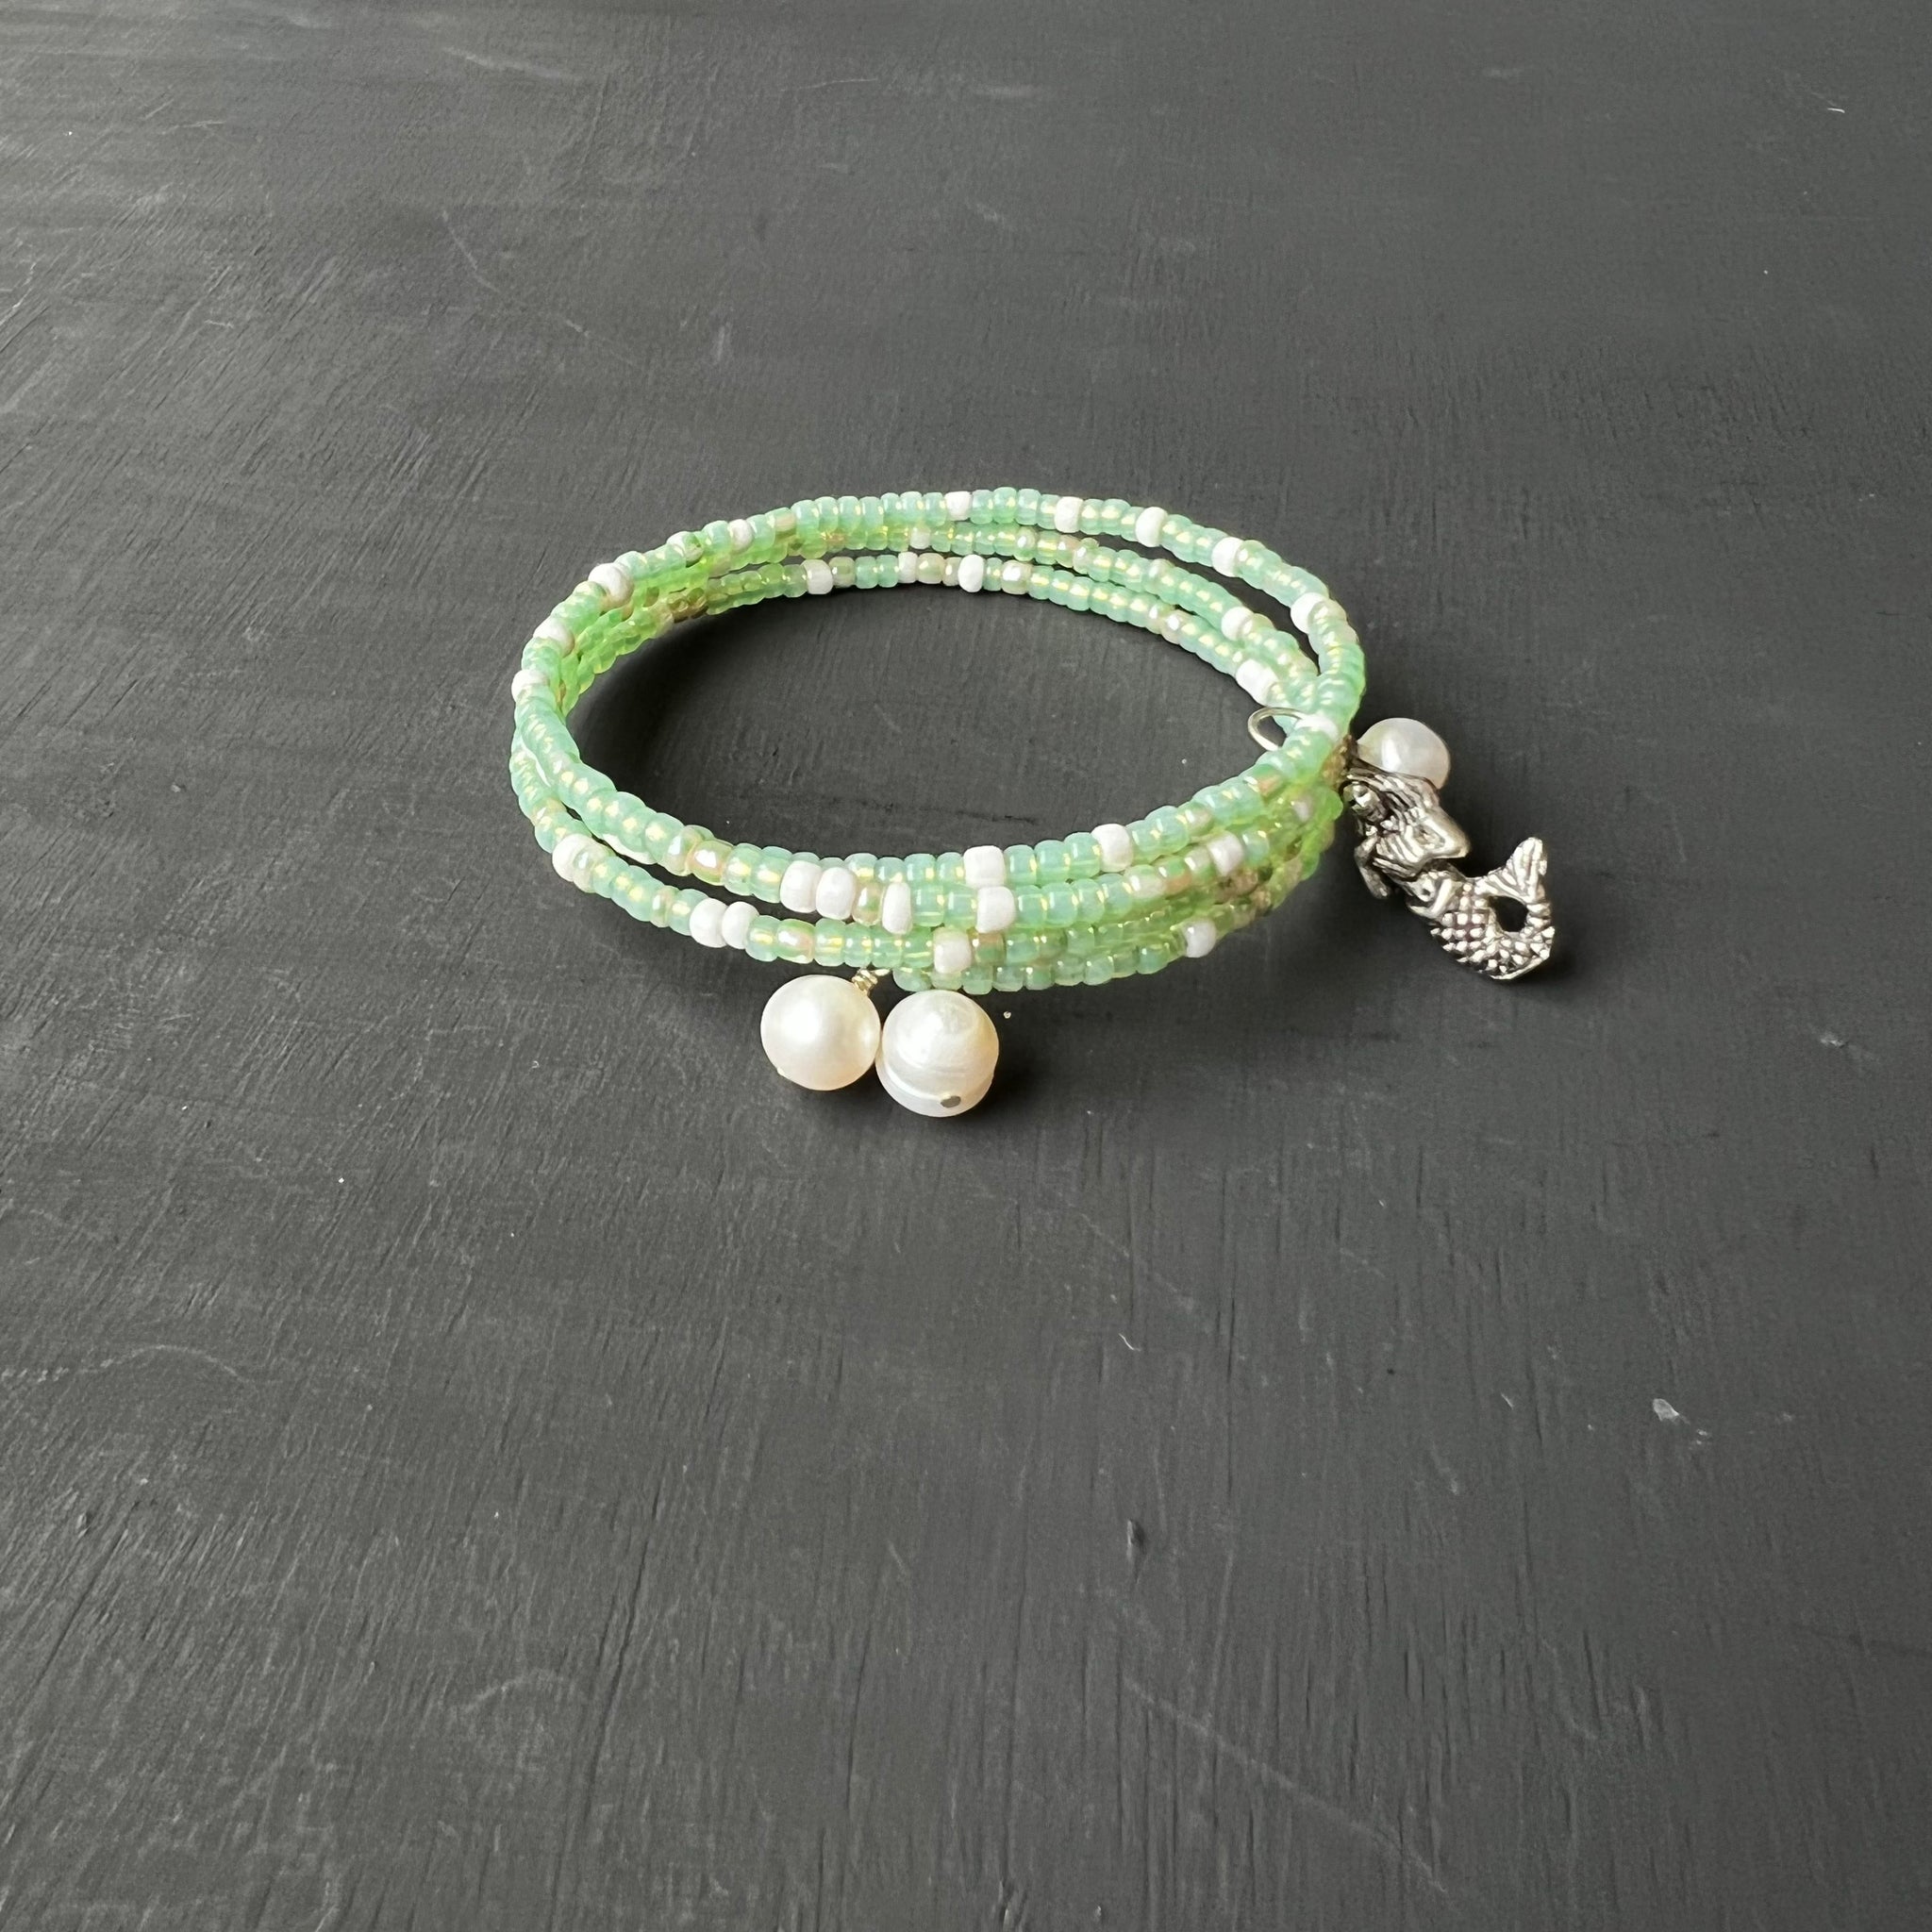 Light green memory wire bracelet with mermaid and pearls